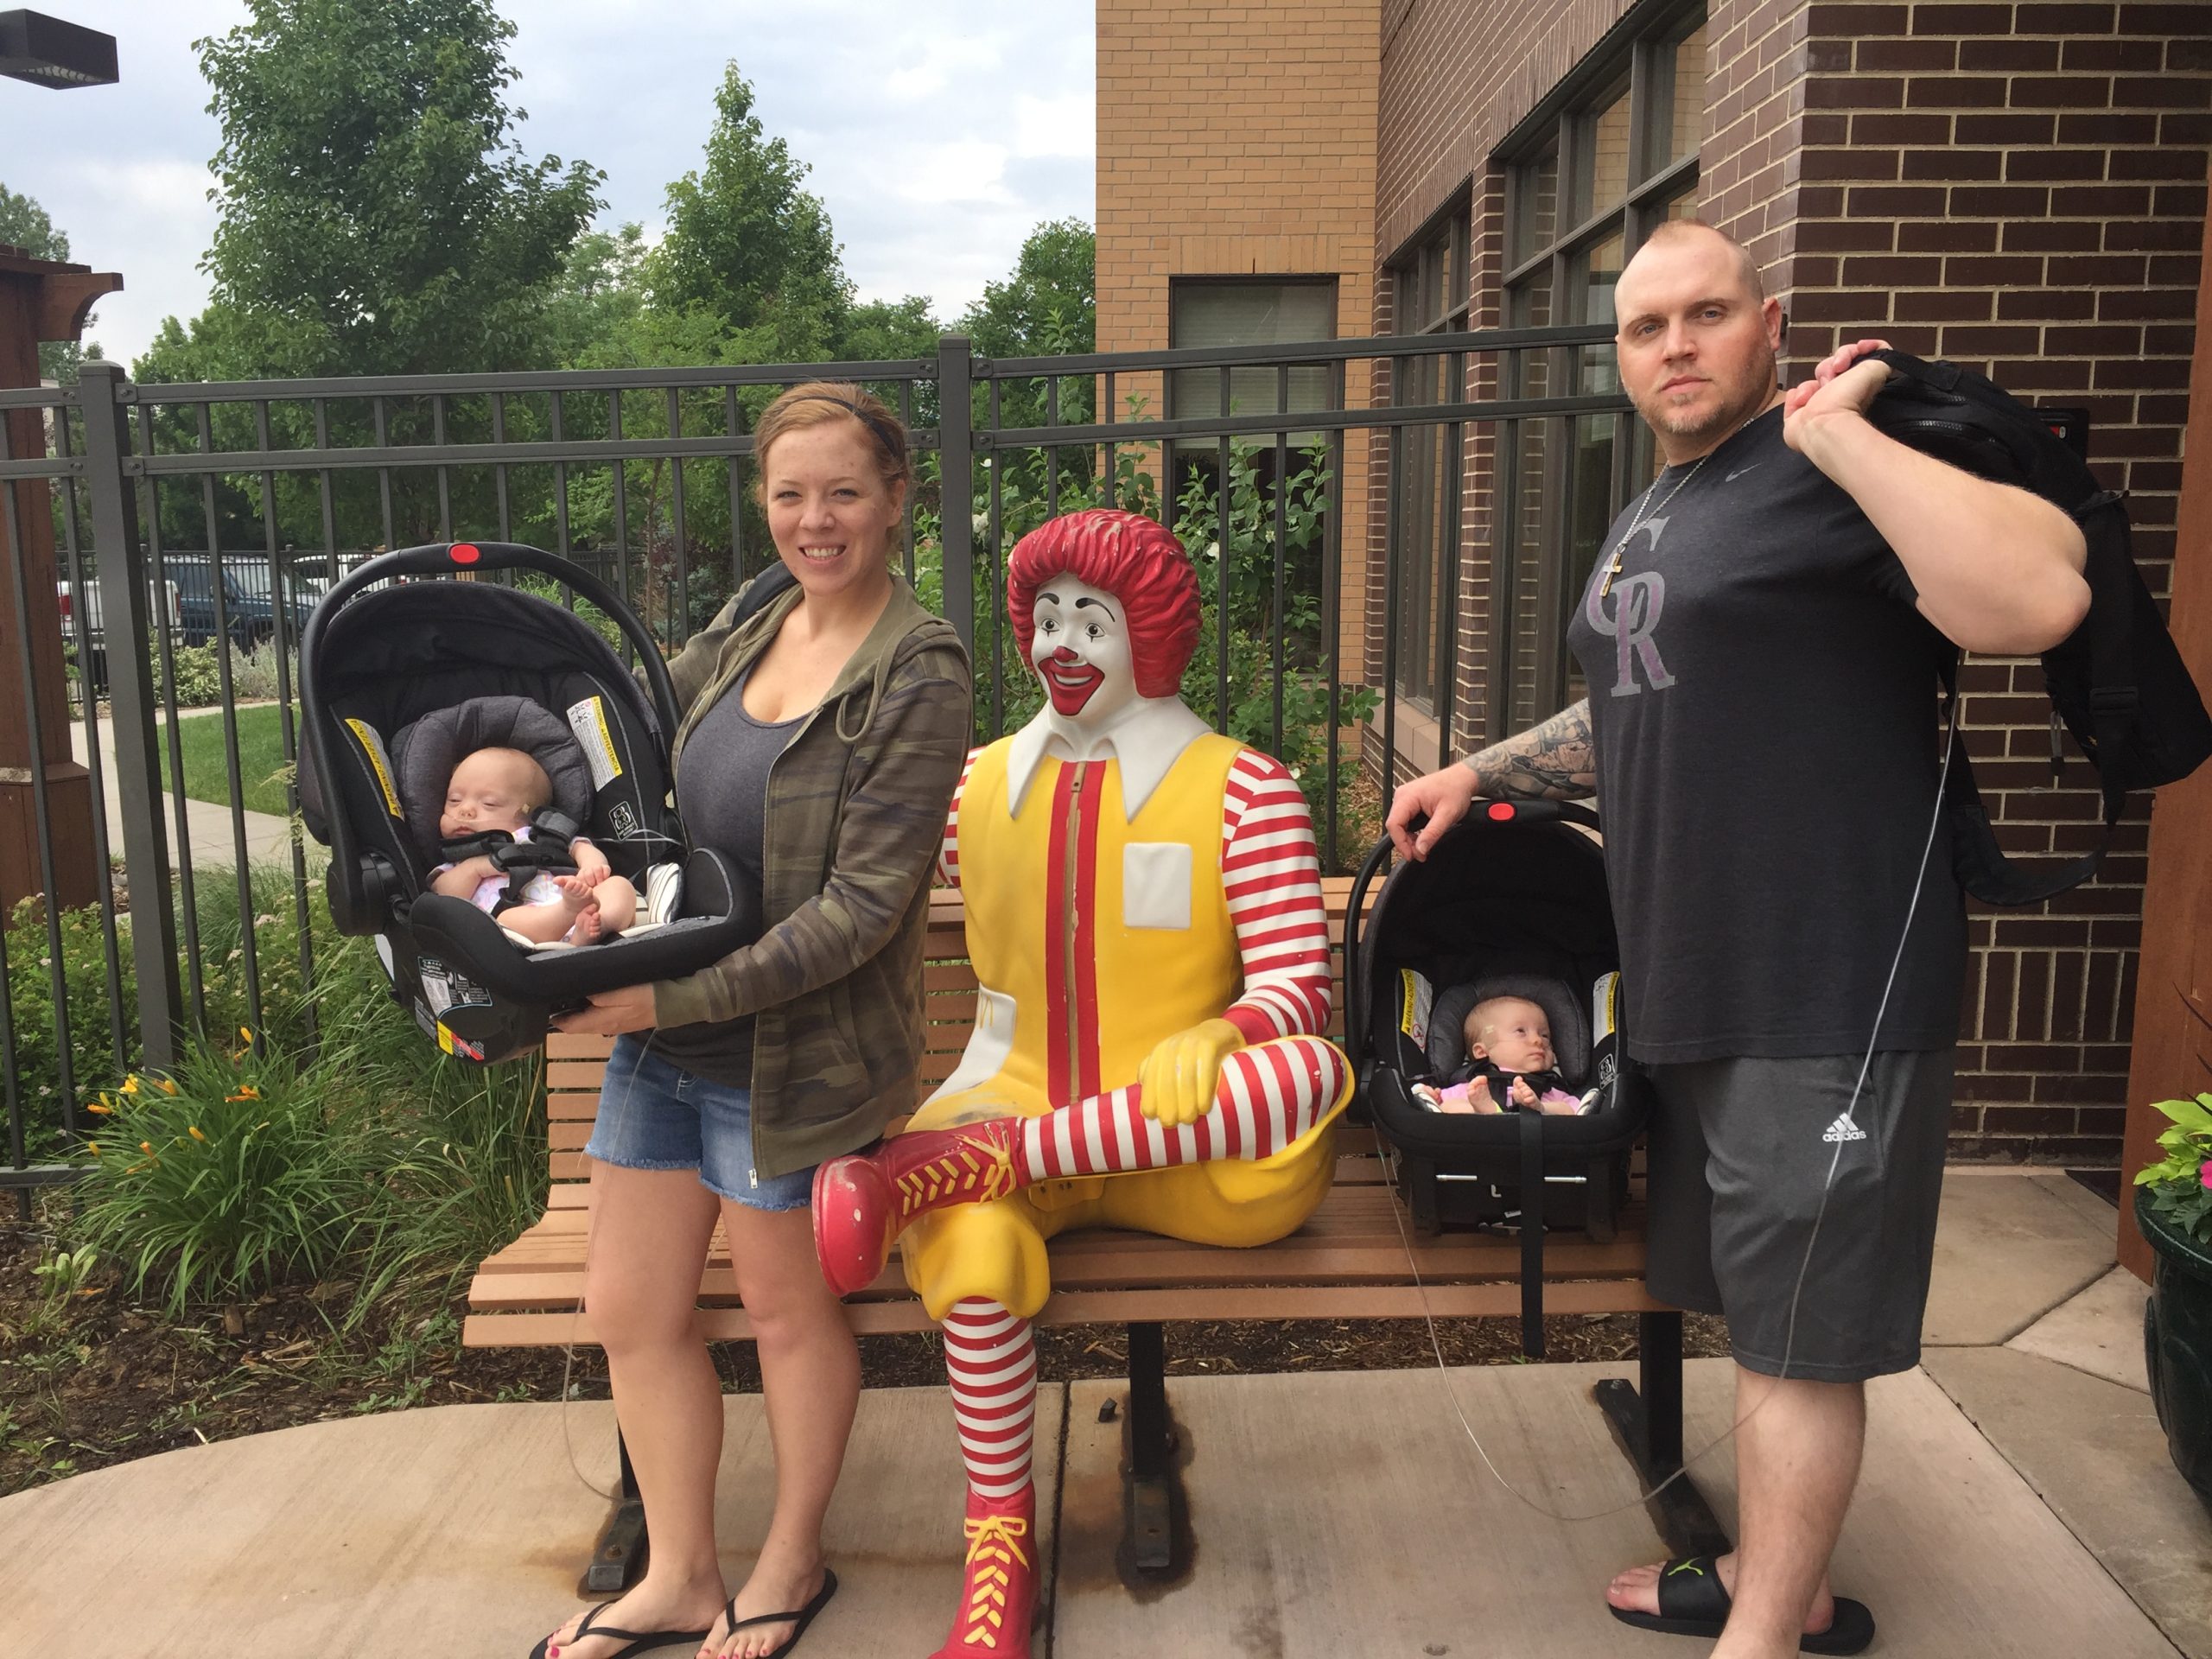 Alison and Brandon pose with their newborn daughters Sawyer and Remi next to a Ronald McDonald statue